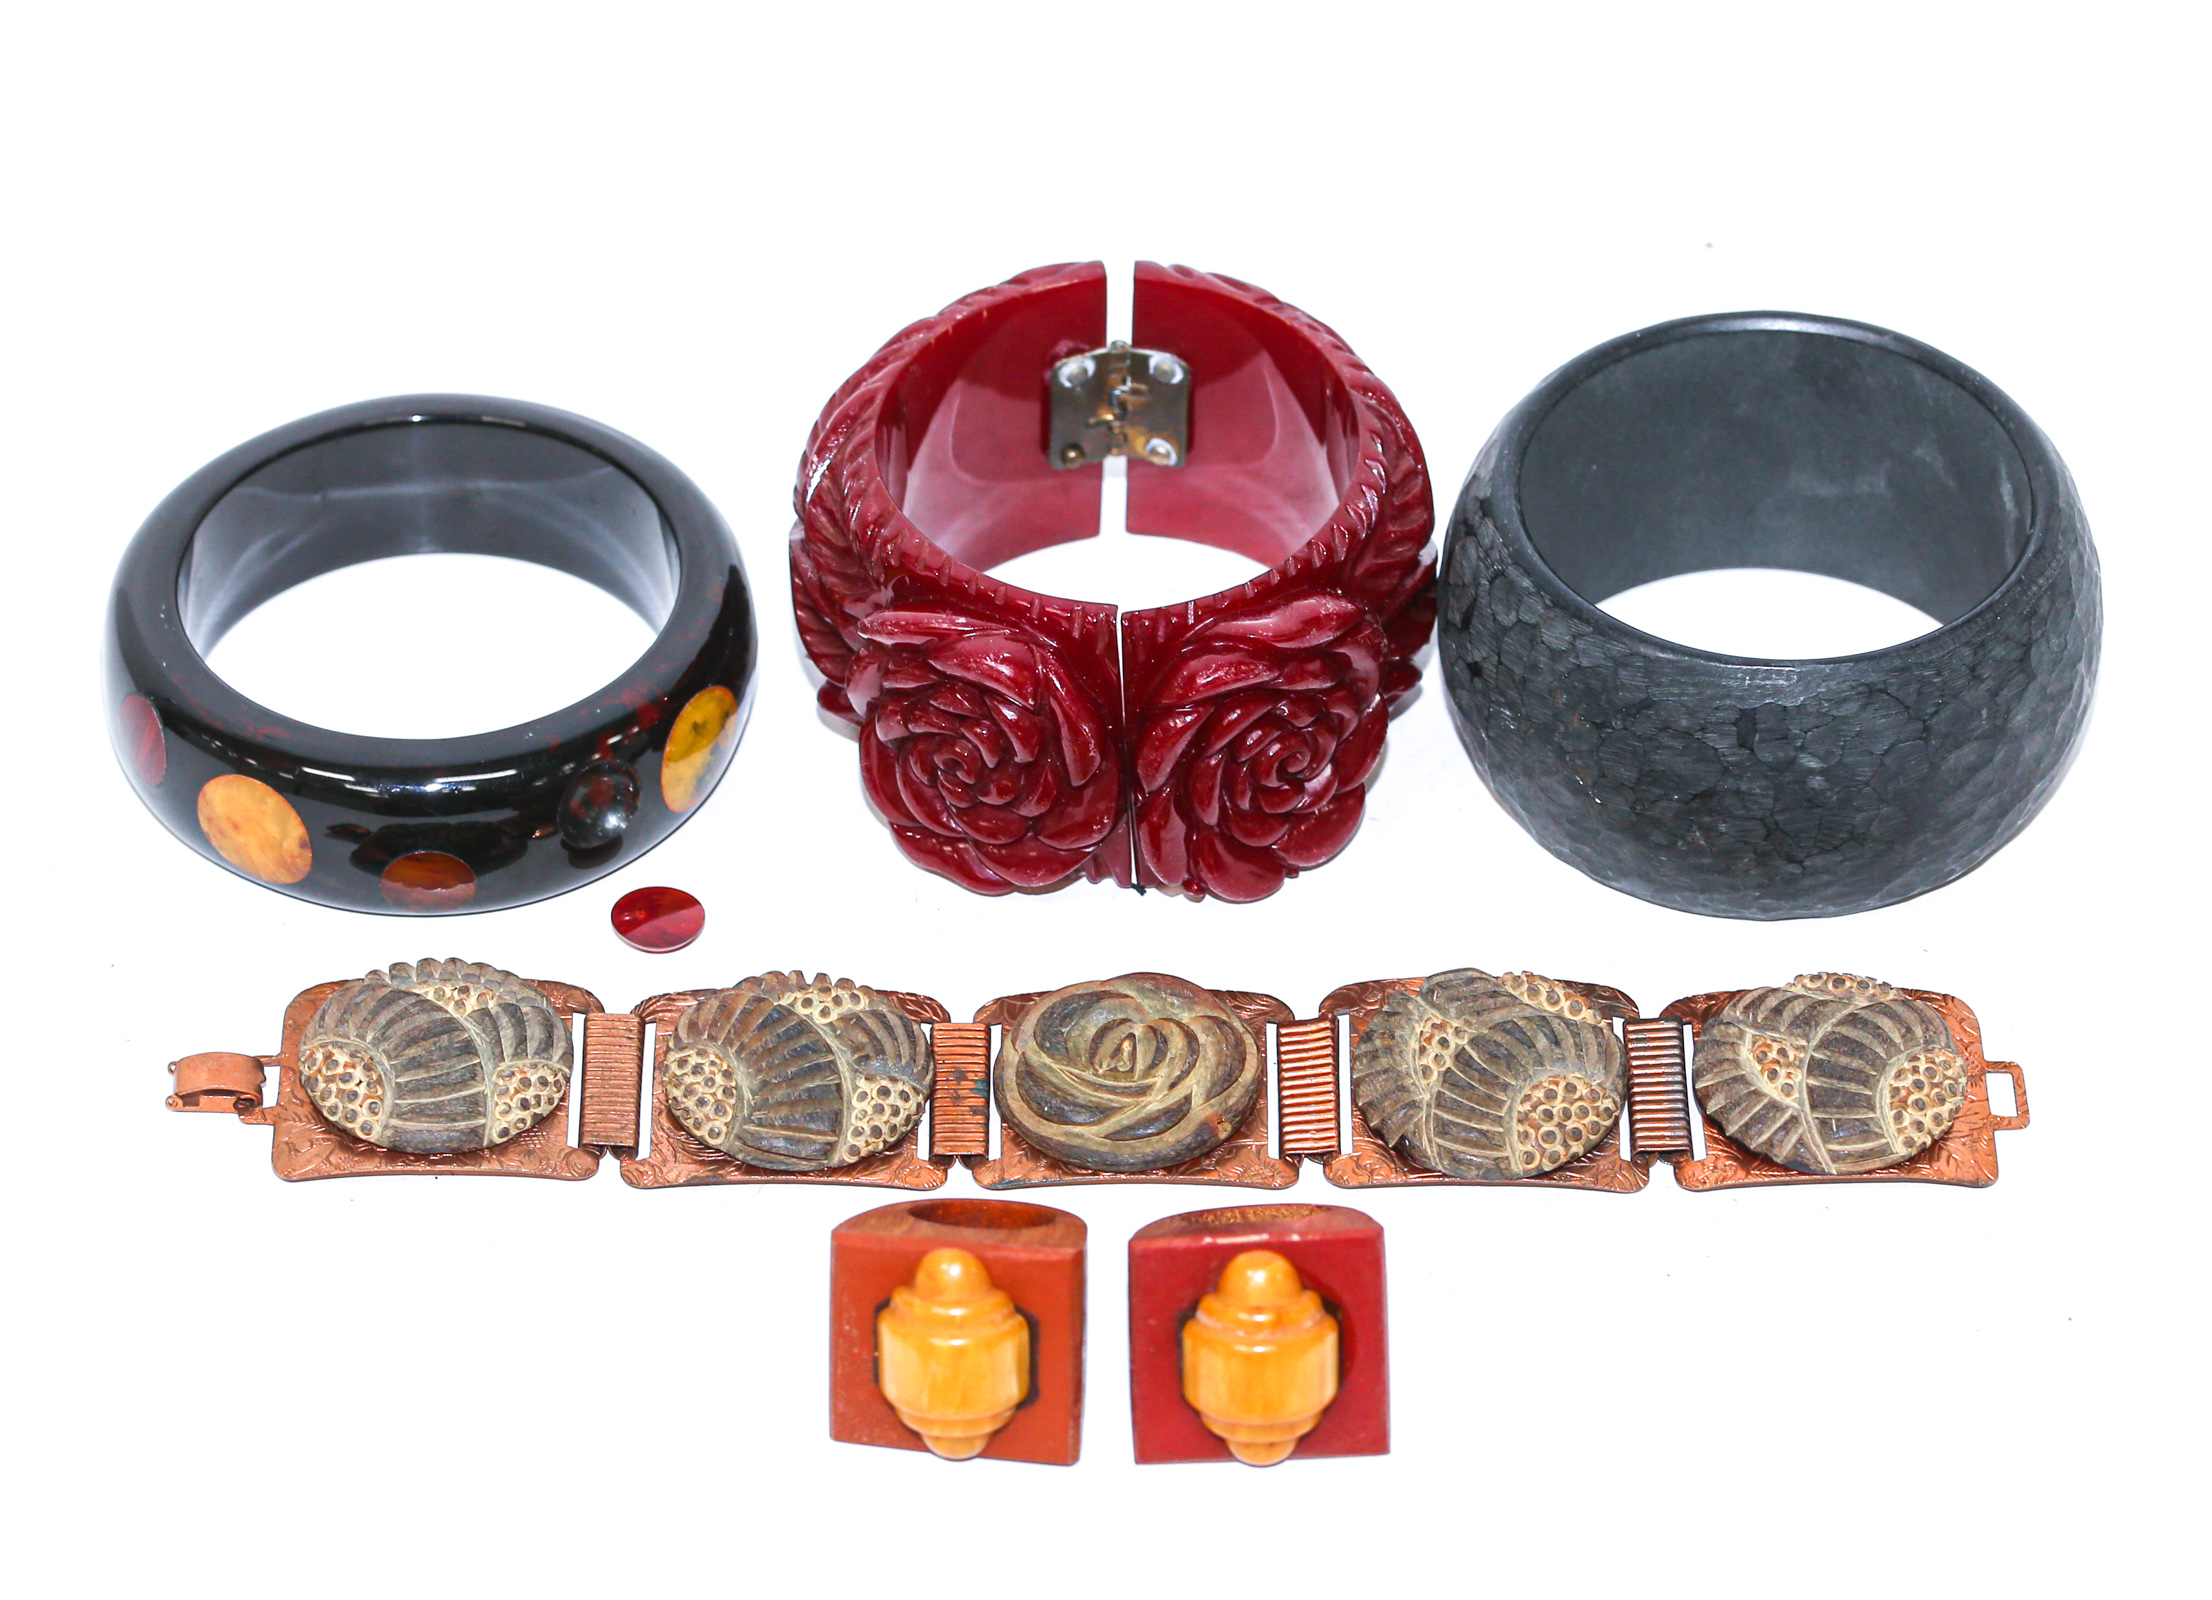 A COLLECTION OF VINTAGE & BAKELITE JEWELRY